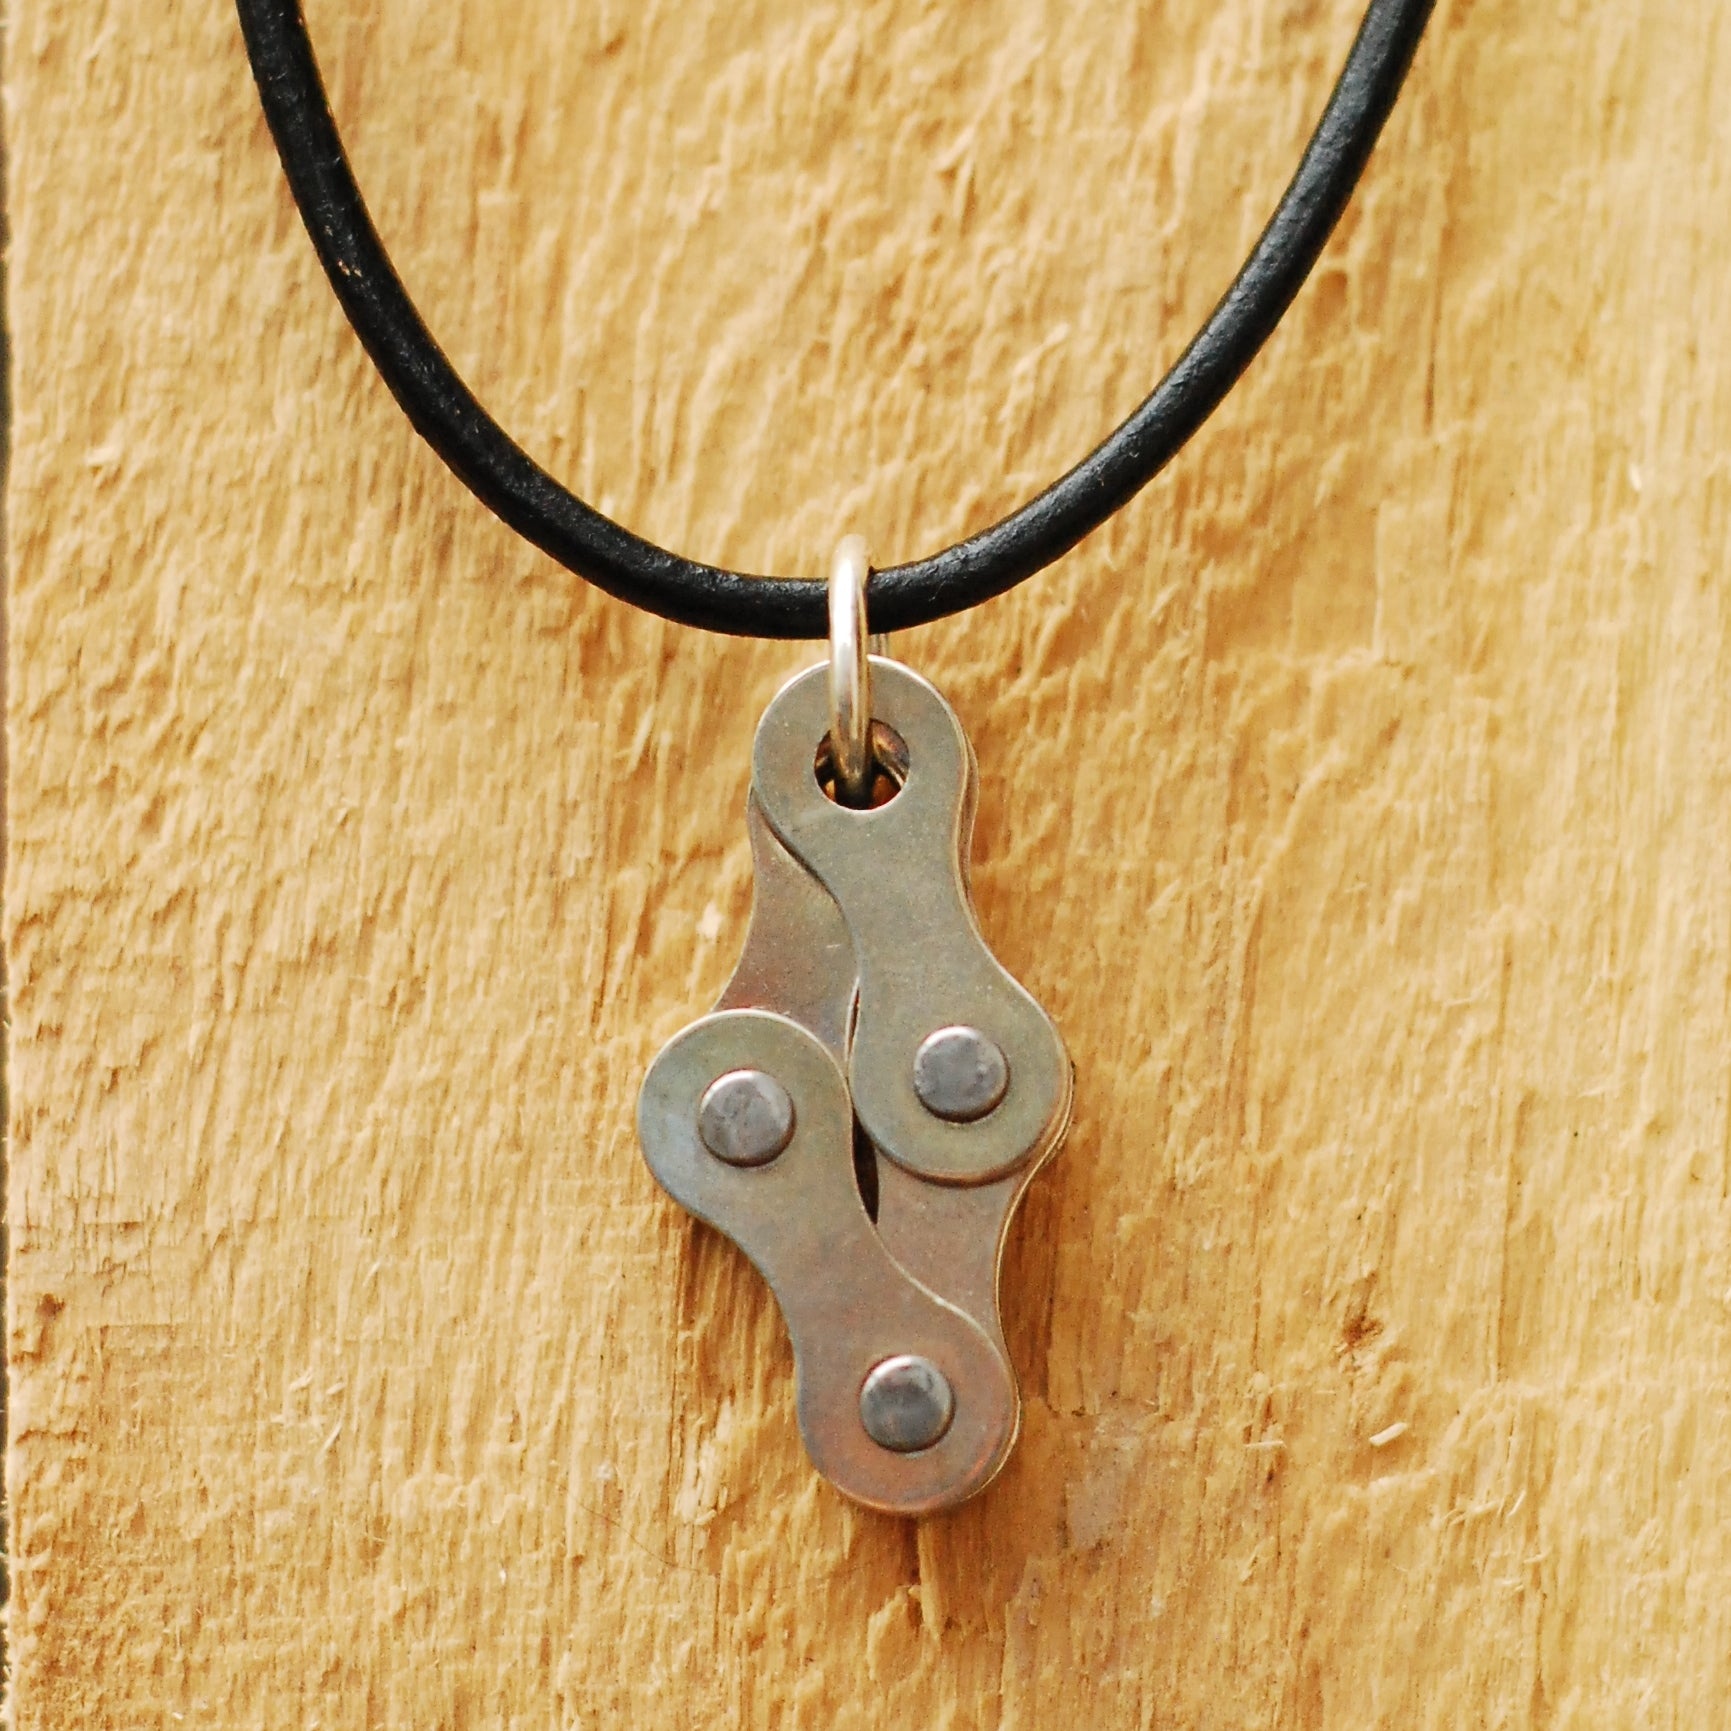 Diamond Recycled Bike Chain Pendant Necklace by Paguro Upcycle